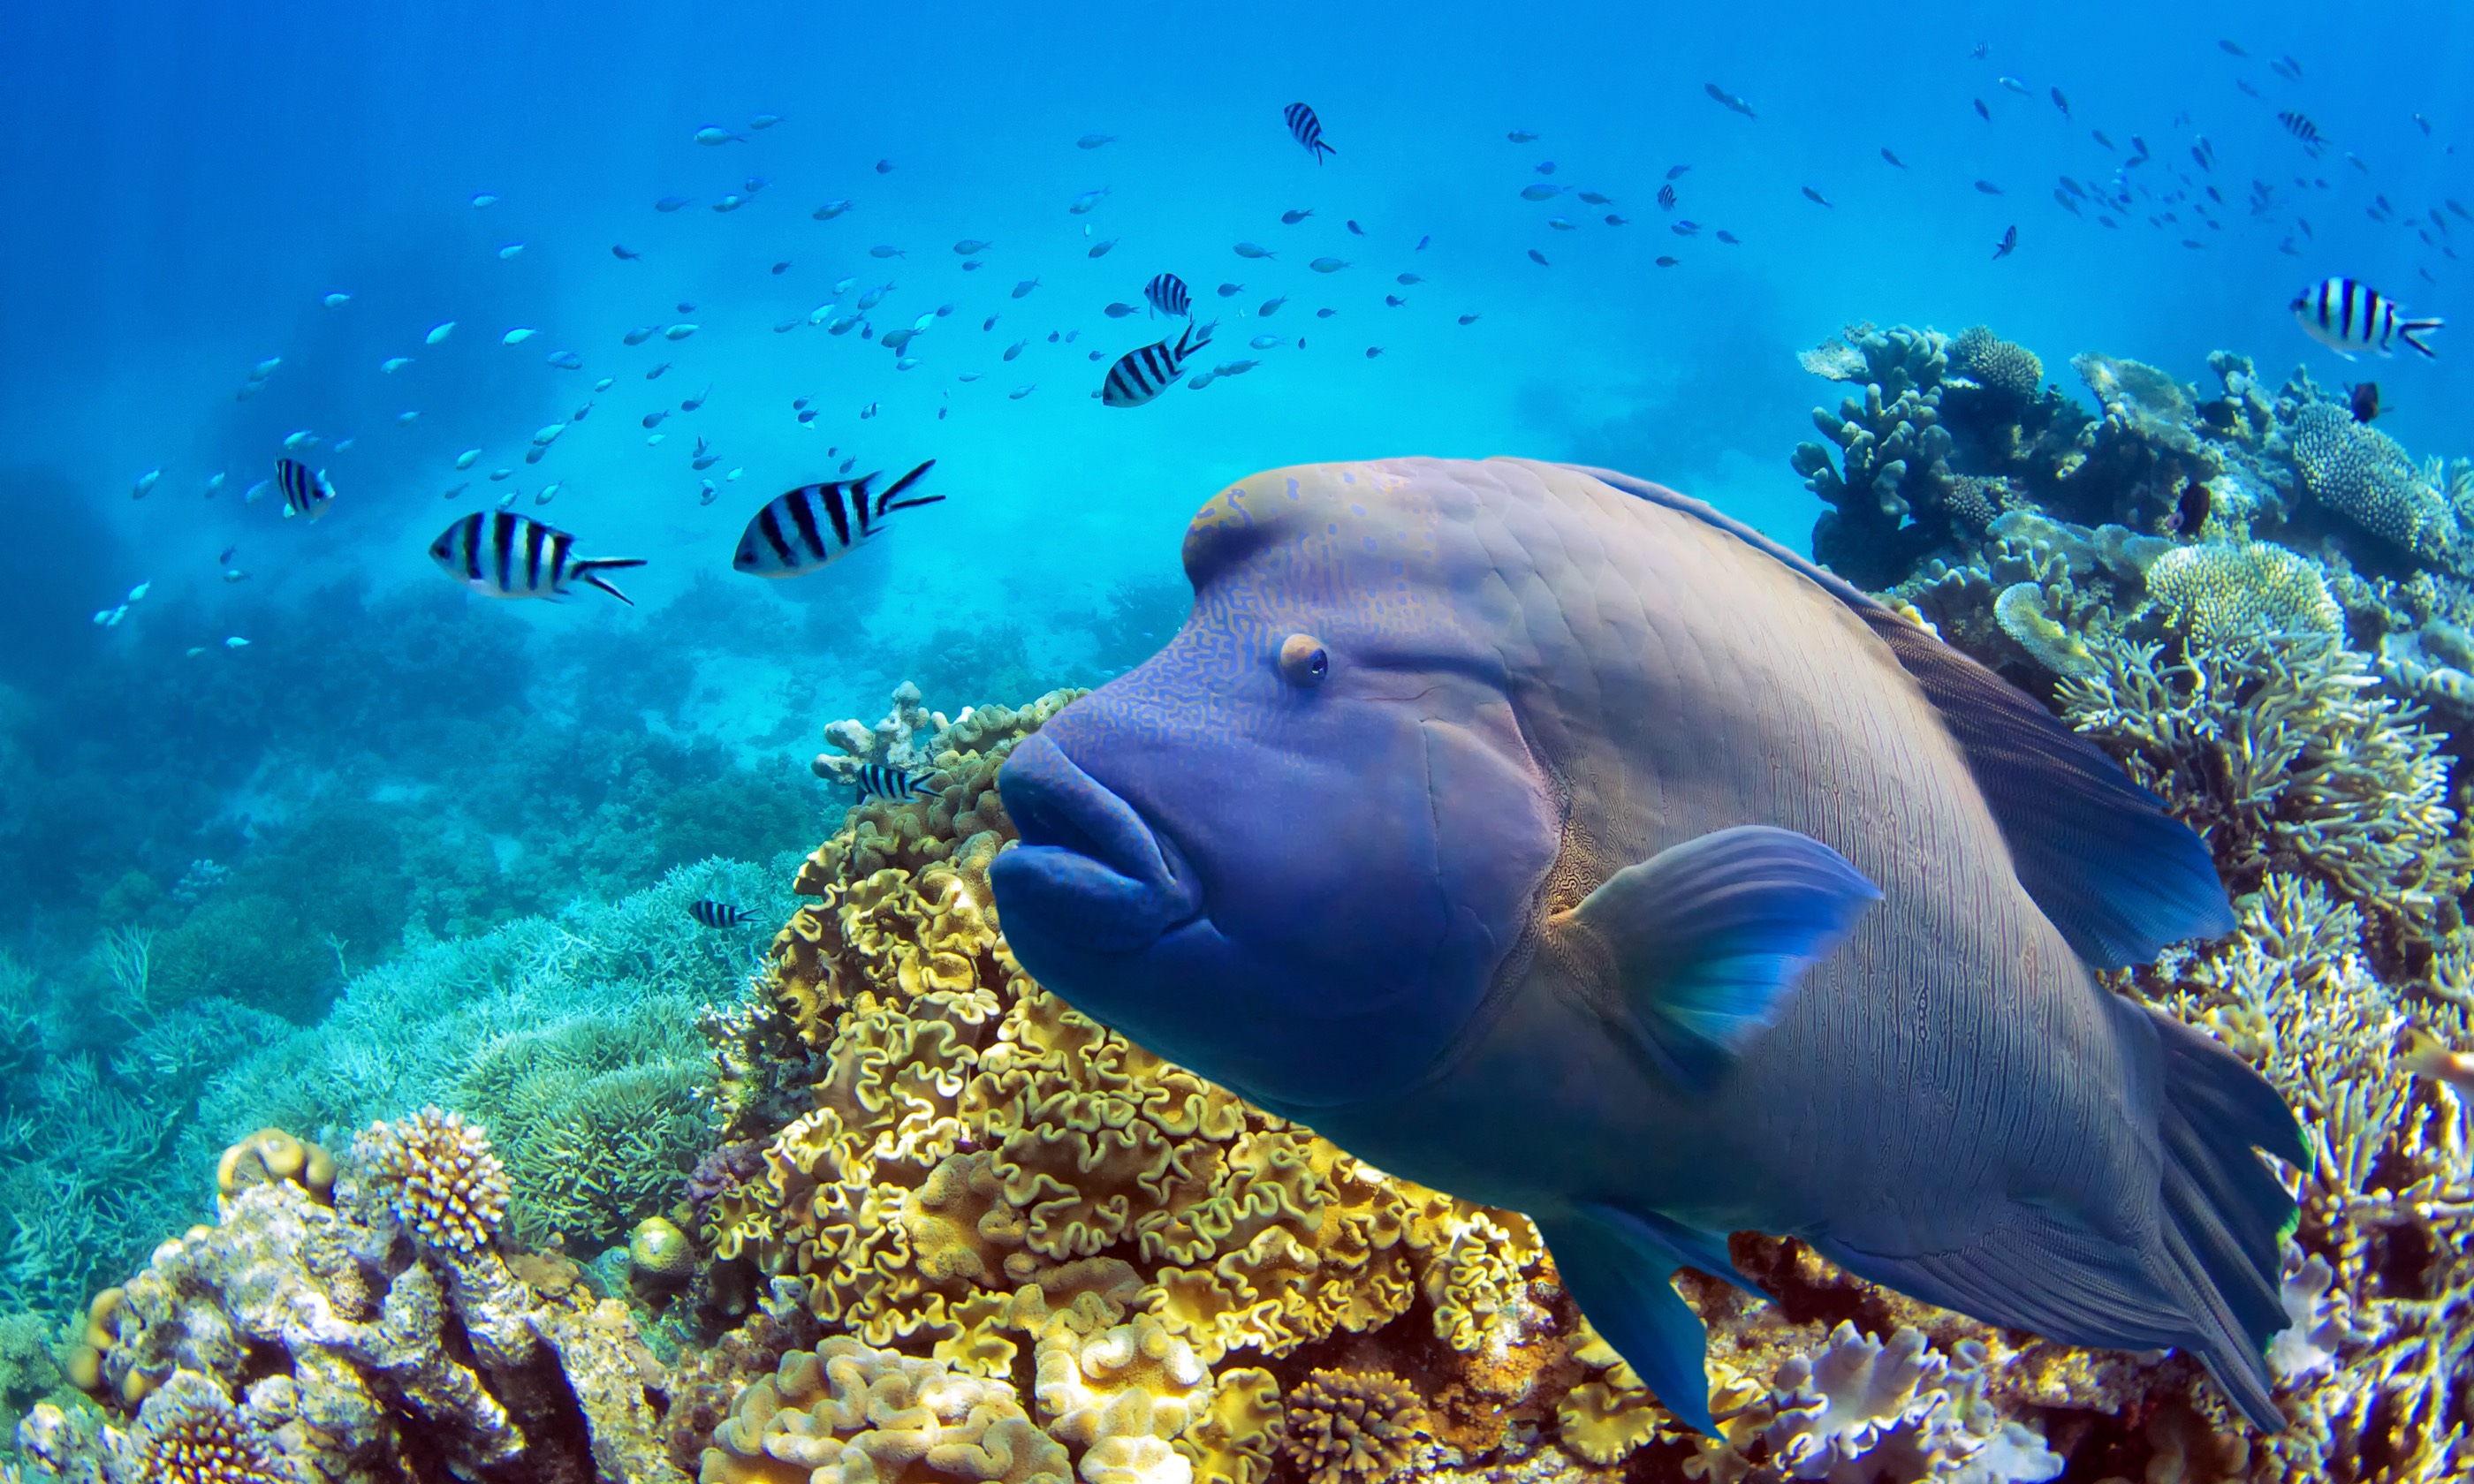 Fish on the Great Barrier Reef (Shutterstock.com)